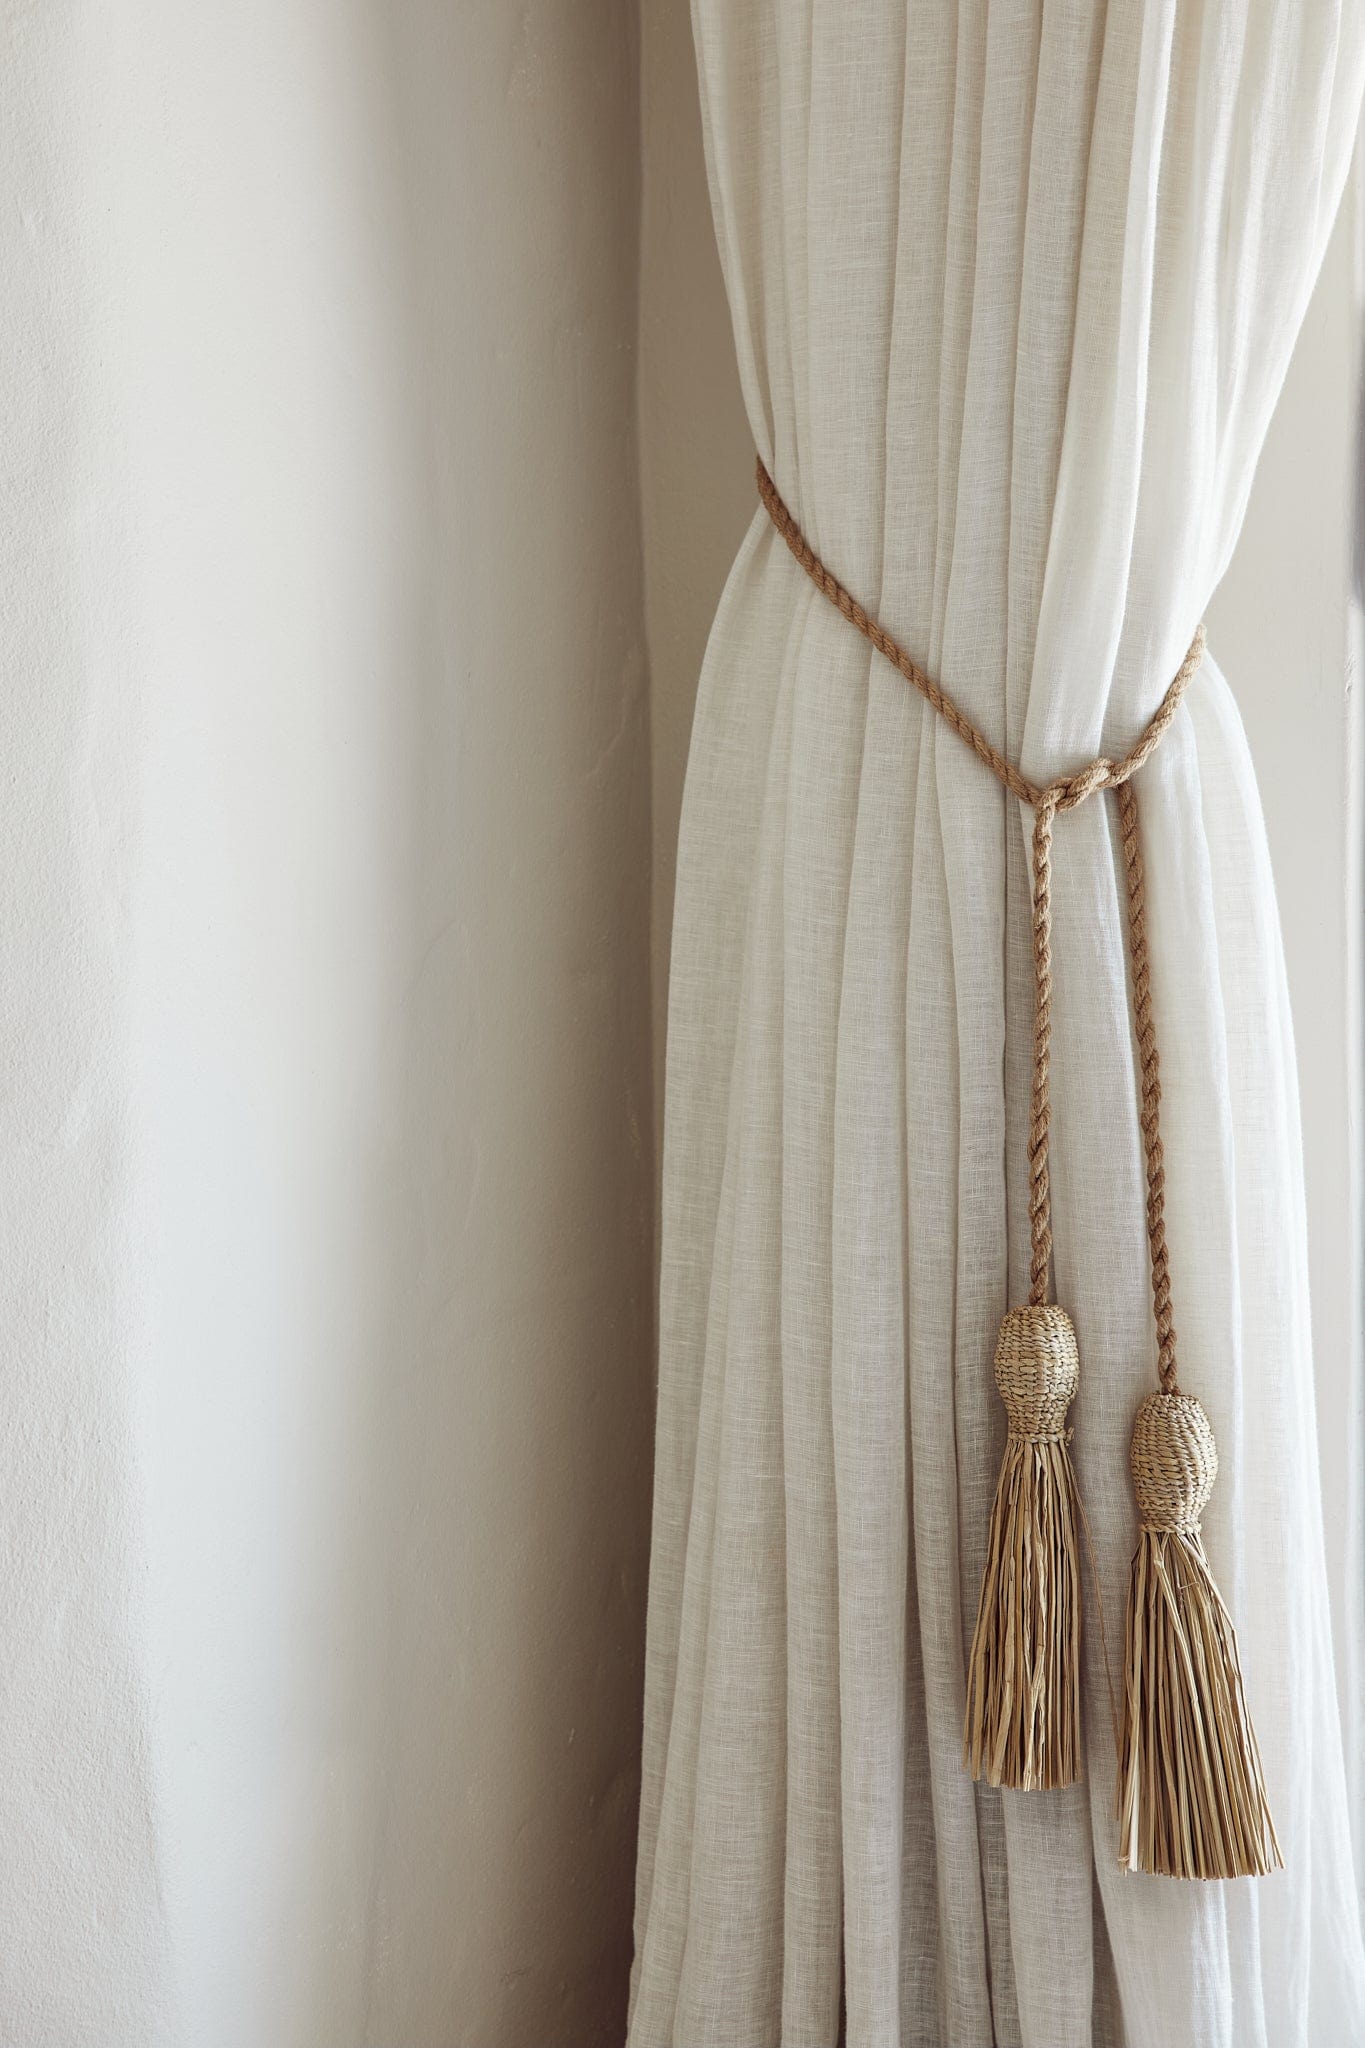 The Dharma Door Home, Table and Gifts Amtali Grass Tassels  Curtain tie-backs